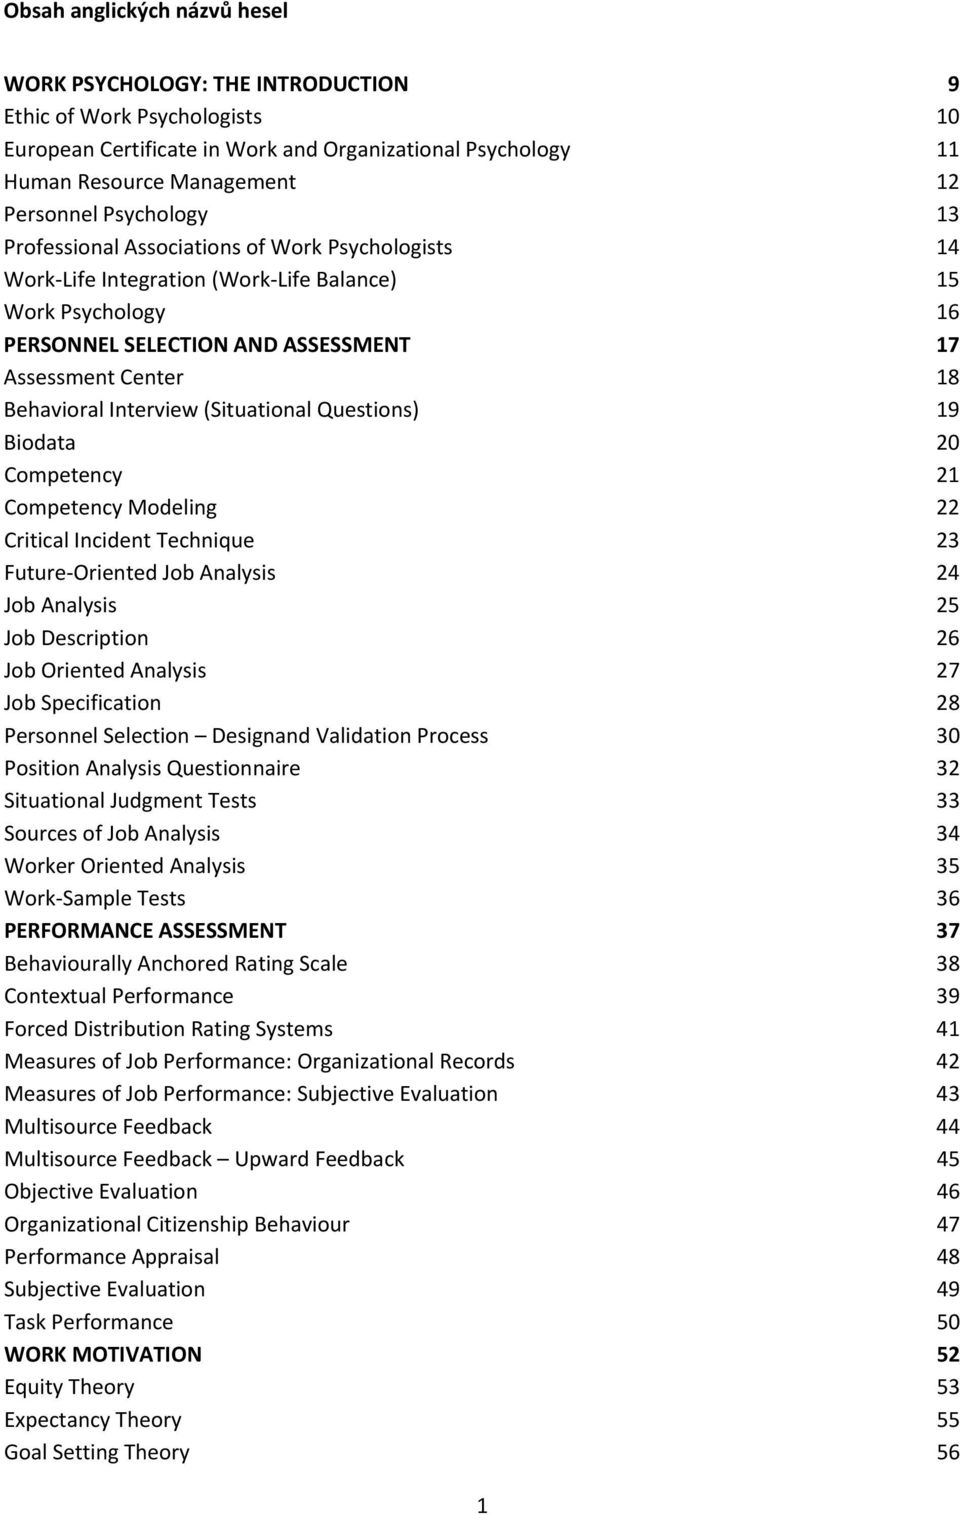 Interview (Situational Questions) 19 Biodata 20 Competency 21 Competency Modeling 22 Critical Incident Technique 23 Future-Oriented Job Analysis 24 Job Analysis 25 Job Description 26 Job Oriented